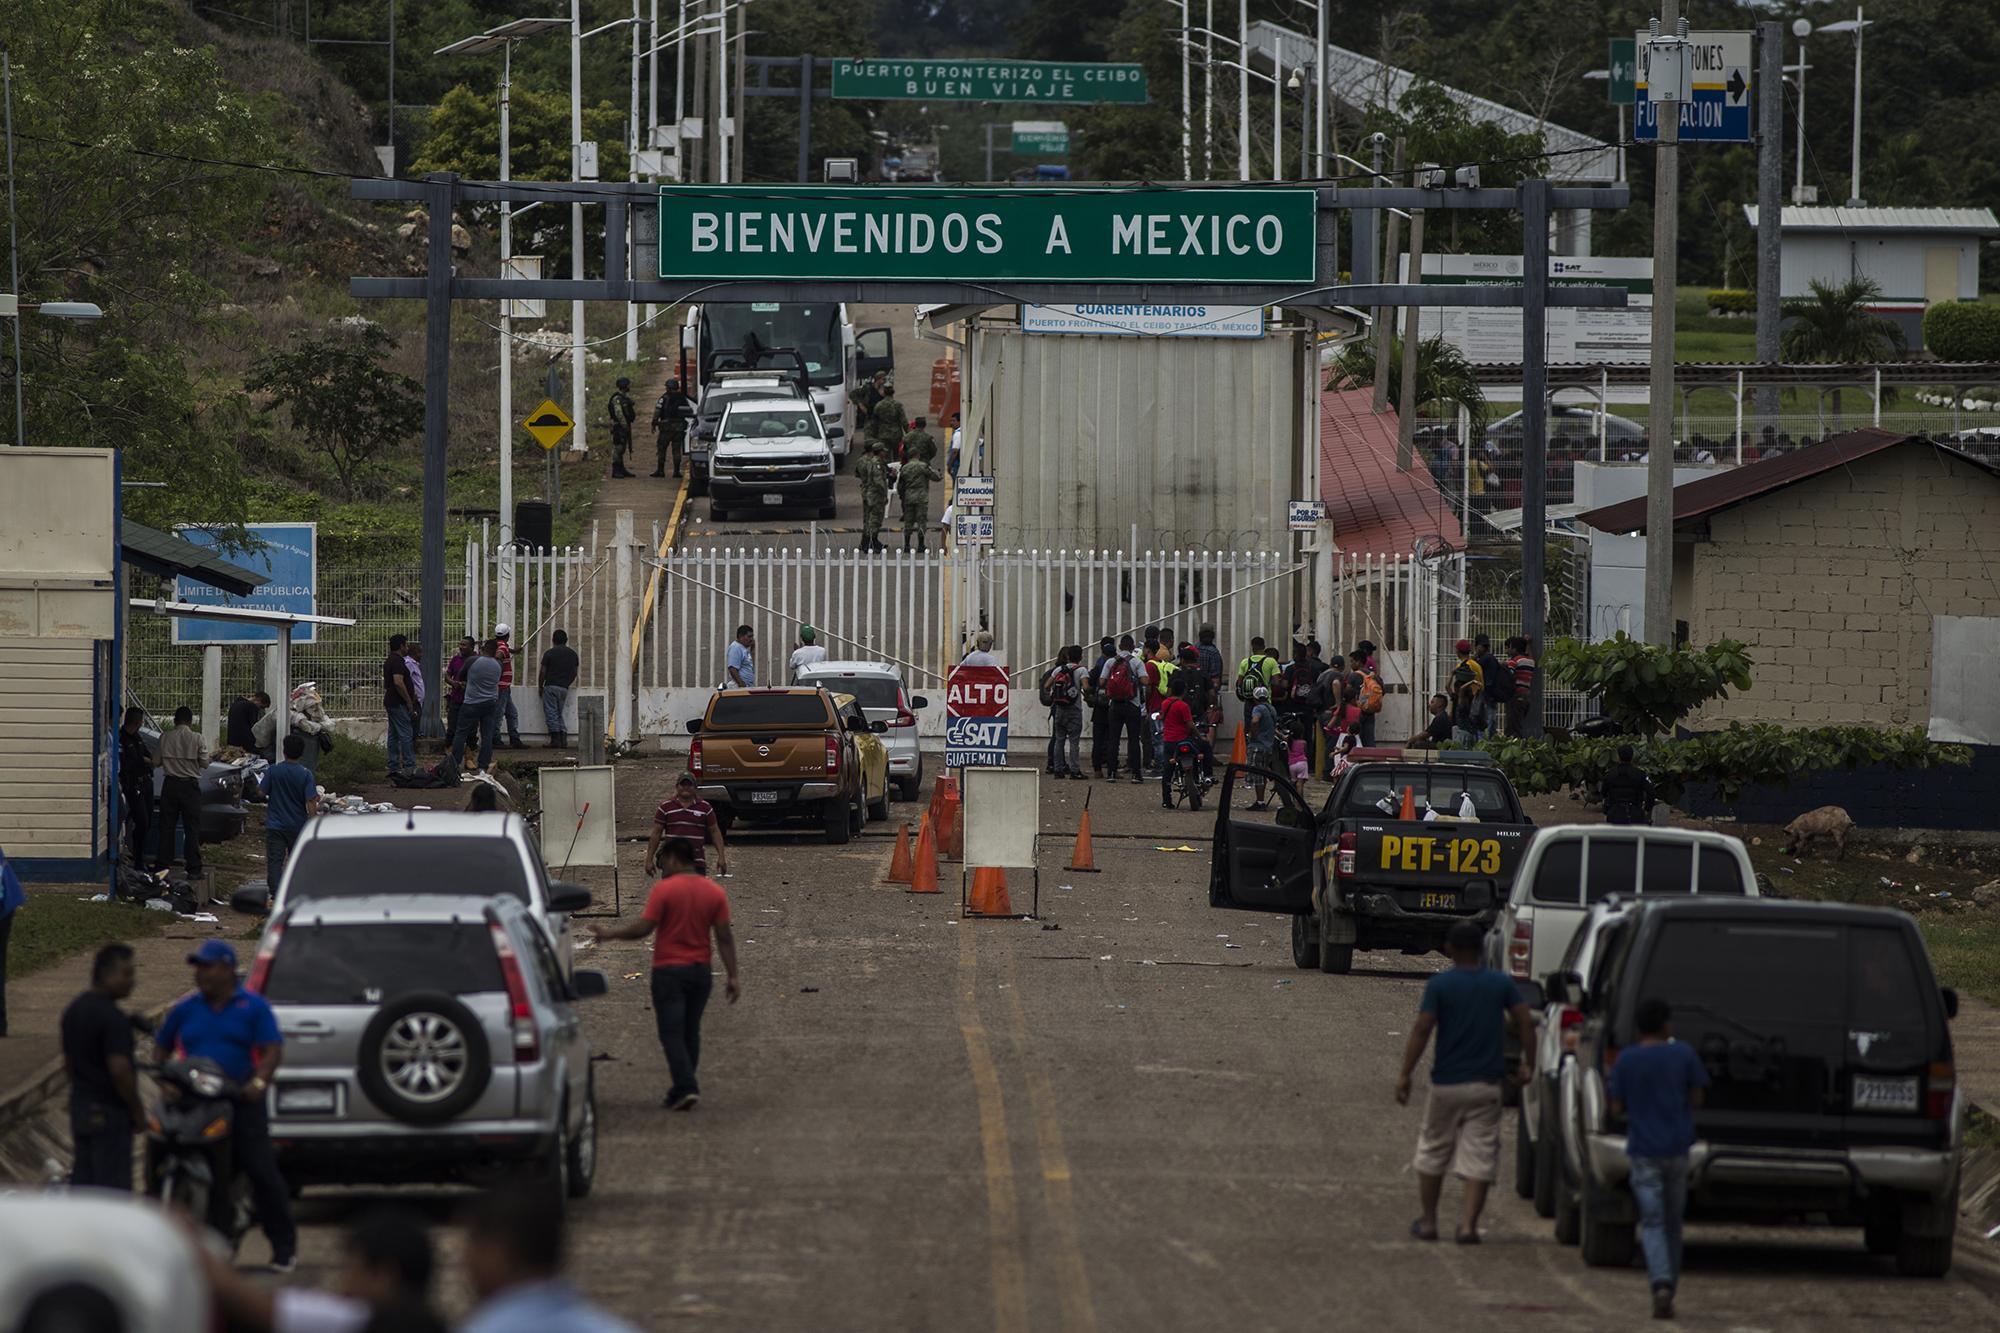 Minutes after the caravan crossed into Mexico, the main street of El Ceibo returned to normal, to the empty routine of a remote border town.